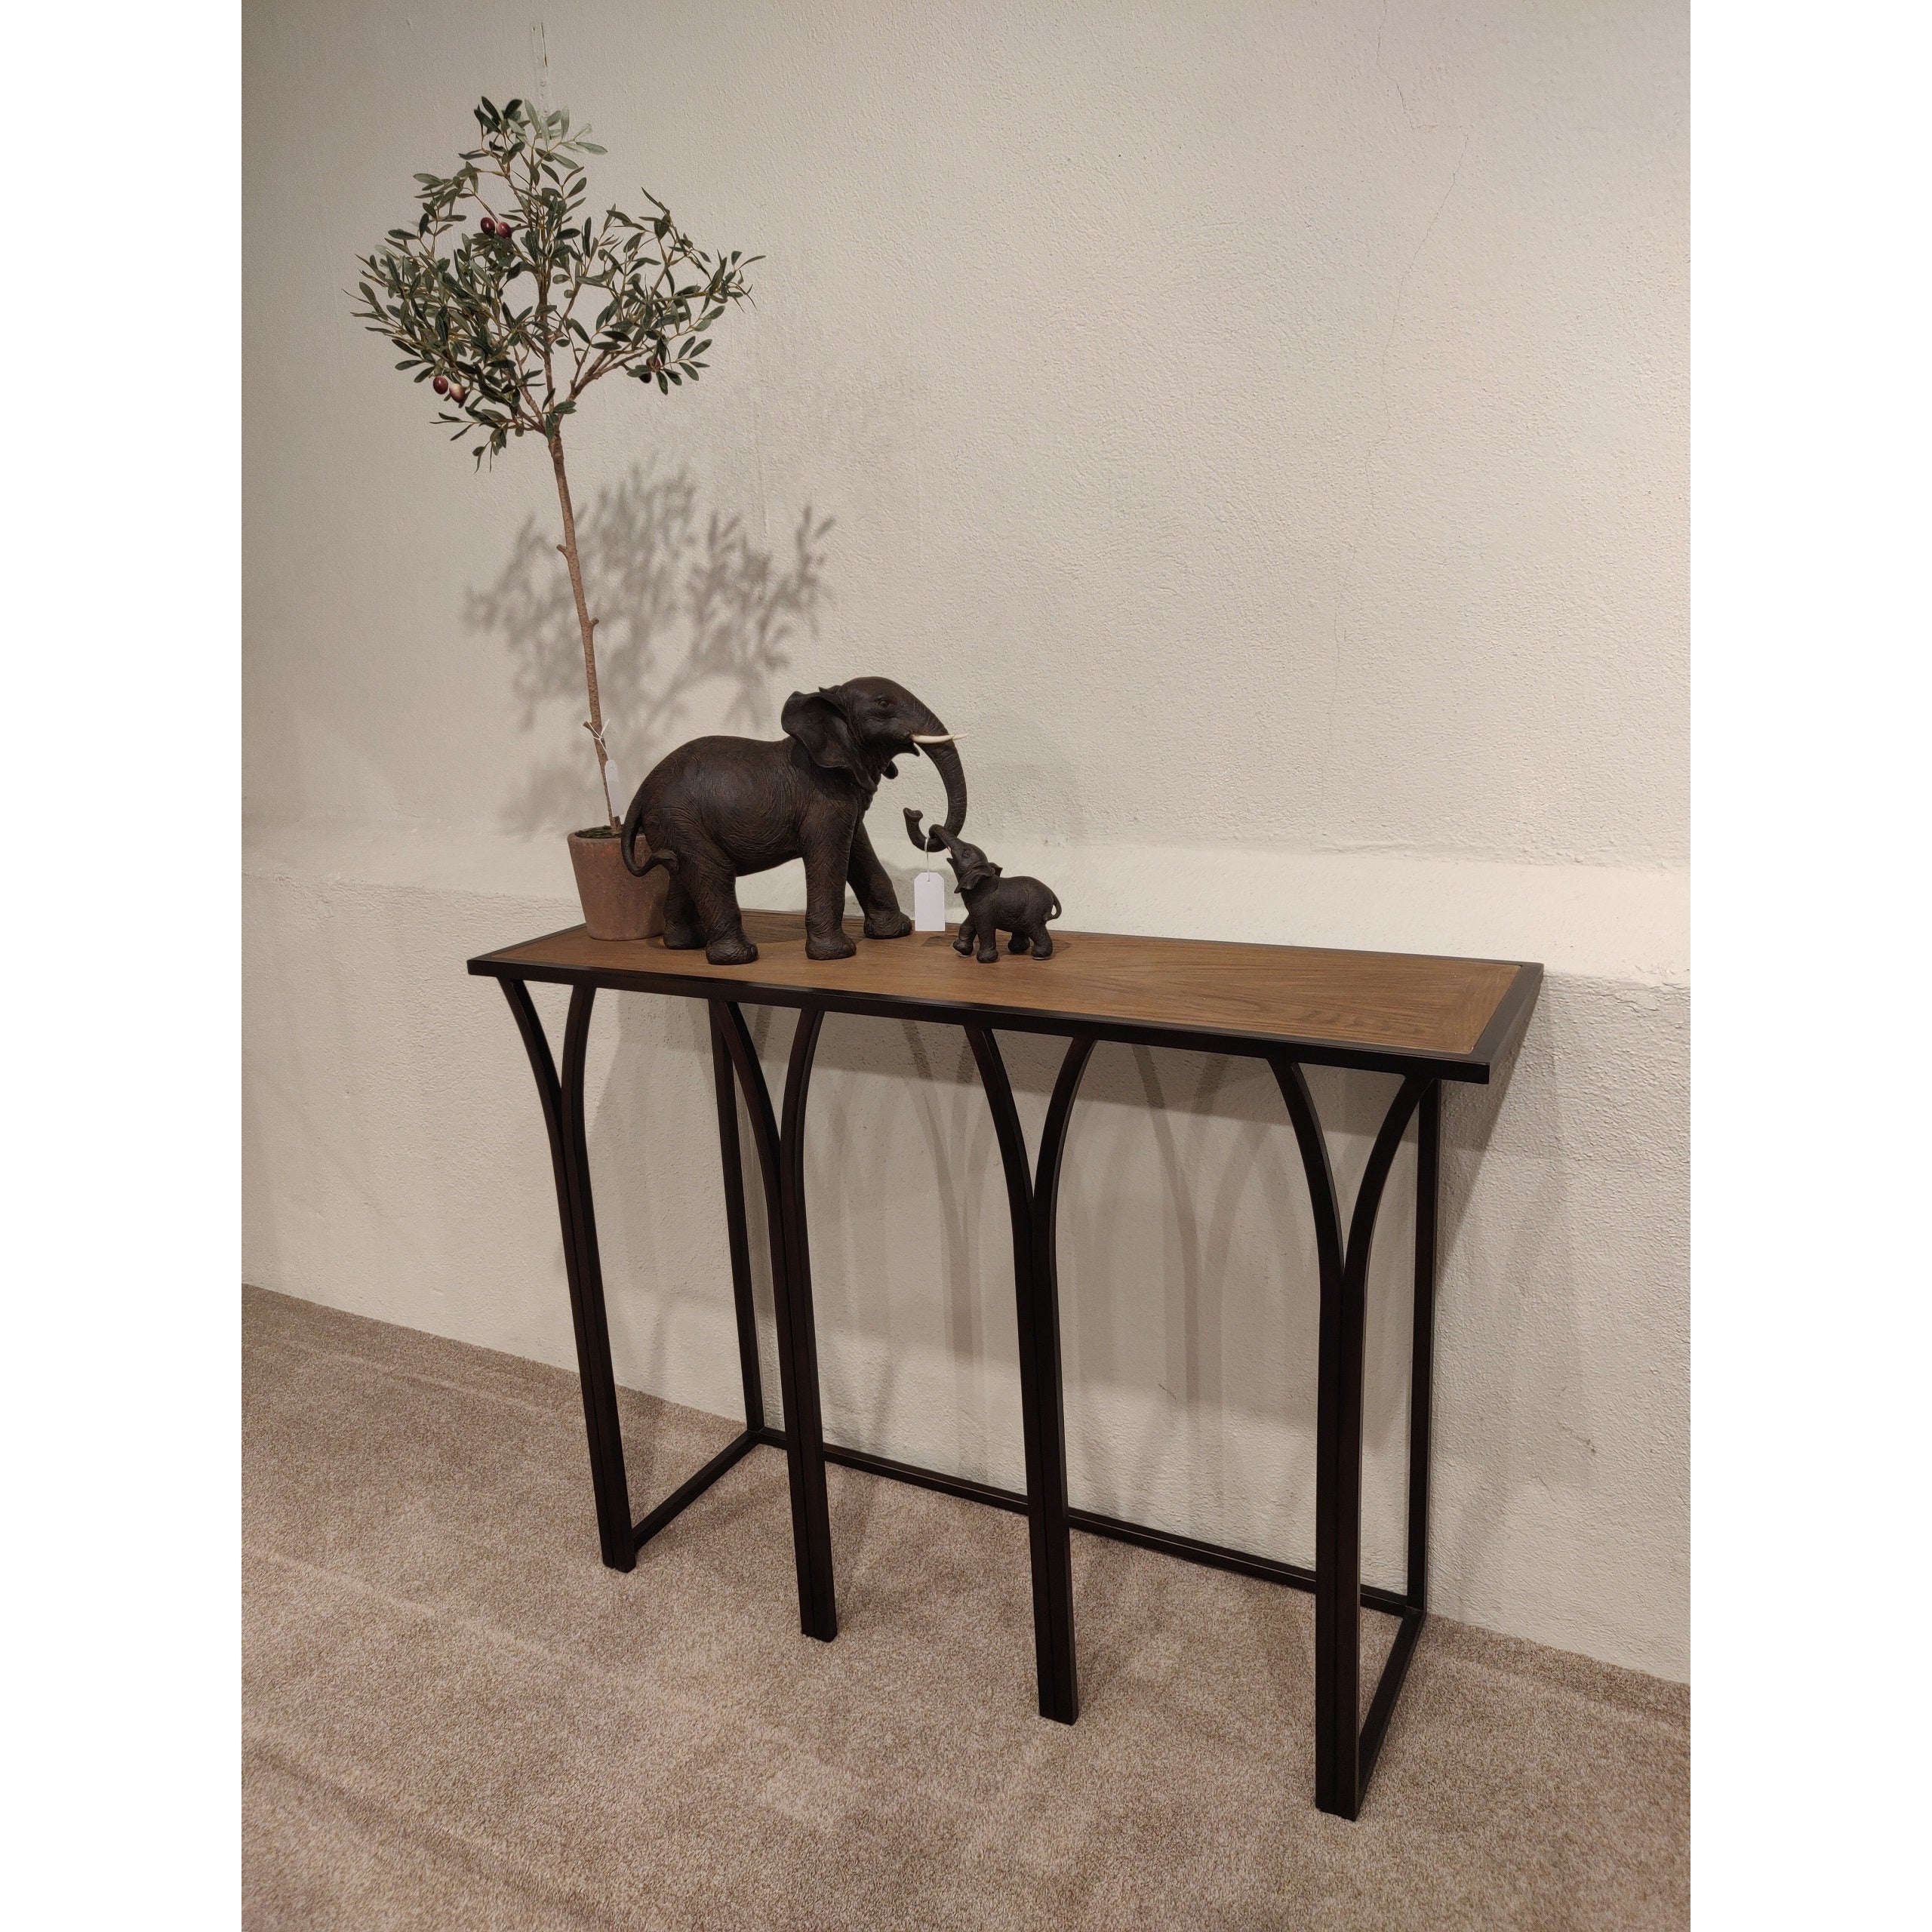 Manhattan Console Table from Upstairs Downstairs Furniture in Lisburn, Monaghan and Enniskillen